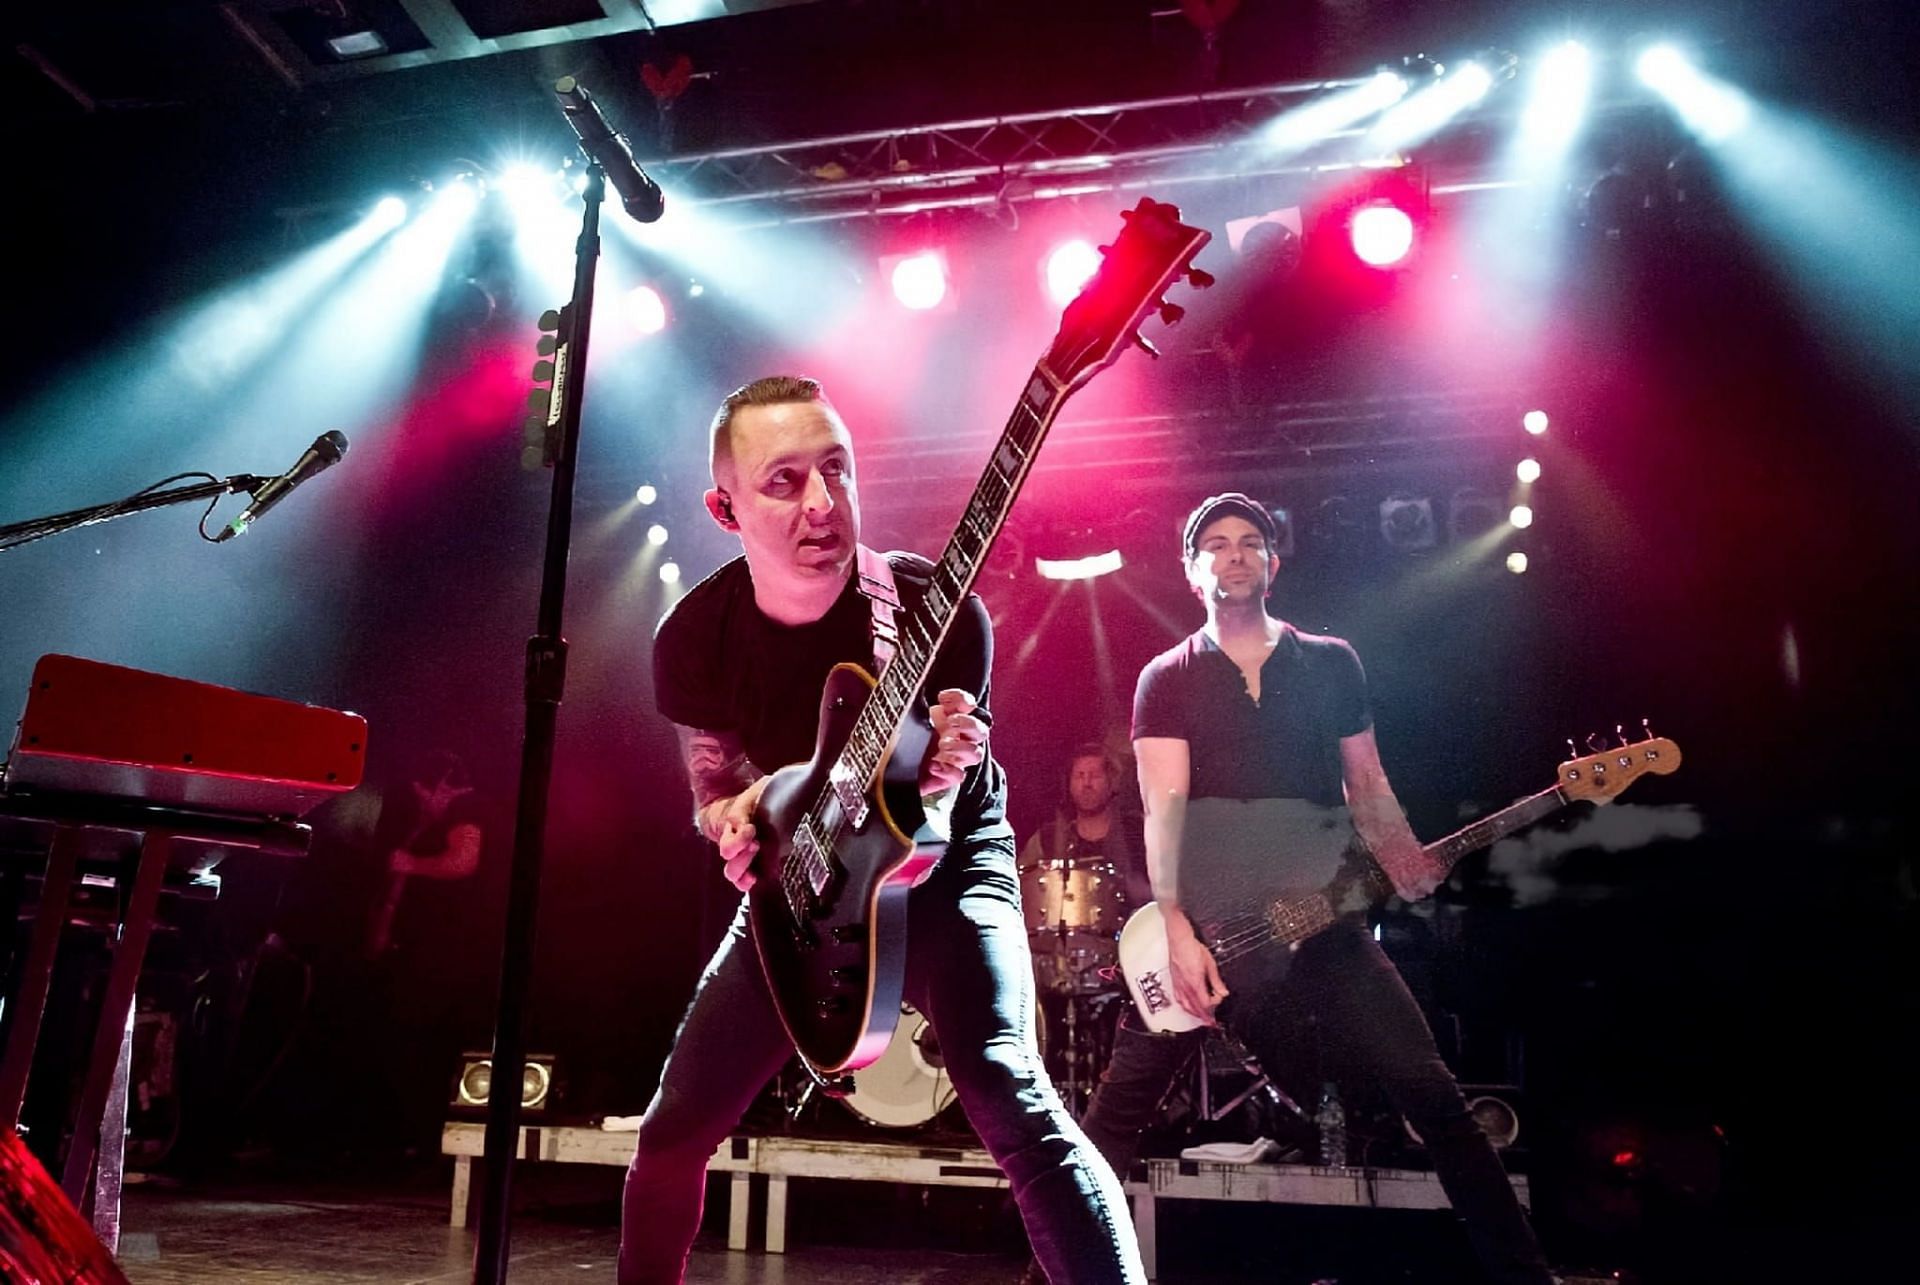 Yellowcard Tour 2023 Tickets, presale, where to buy, dates, venues